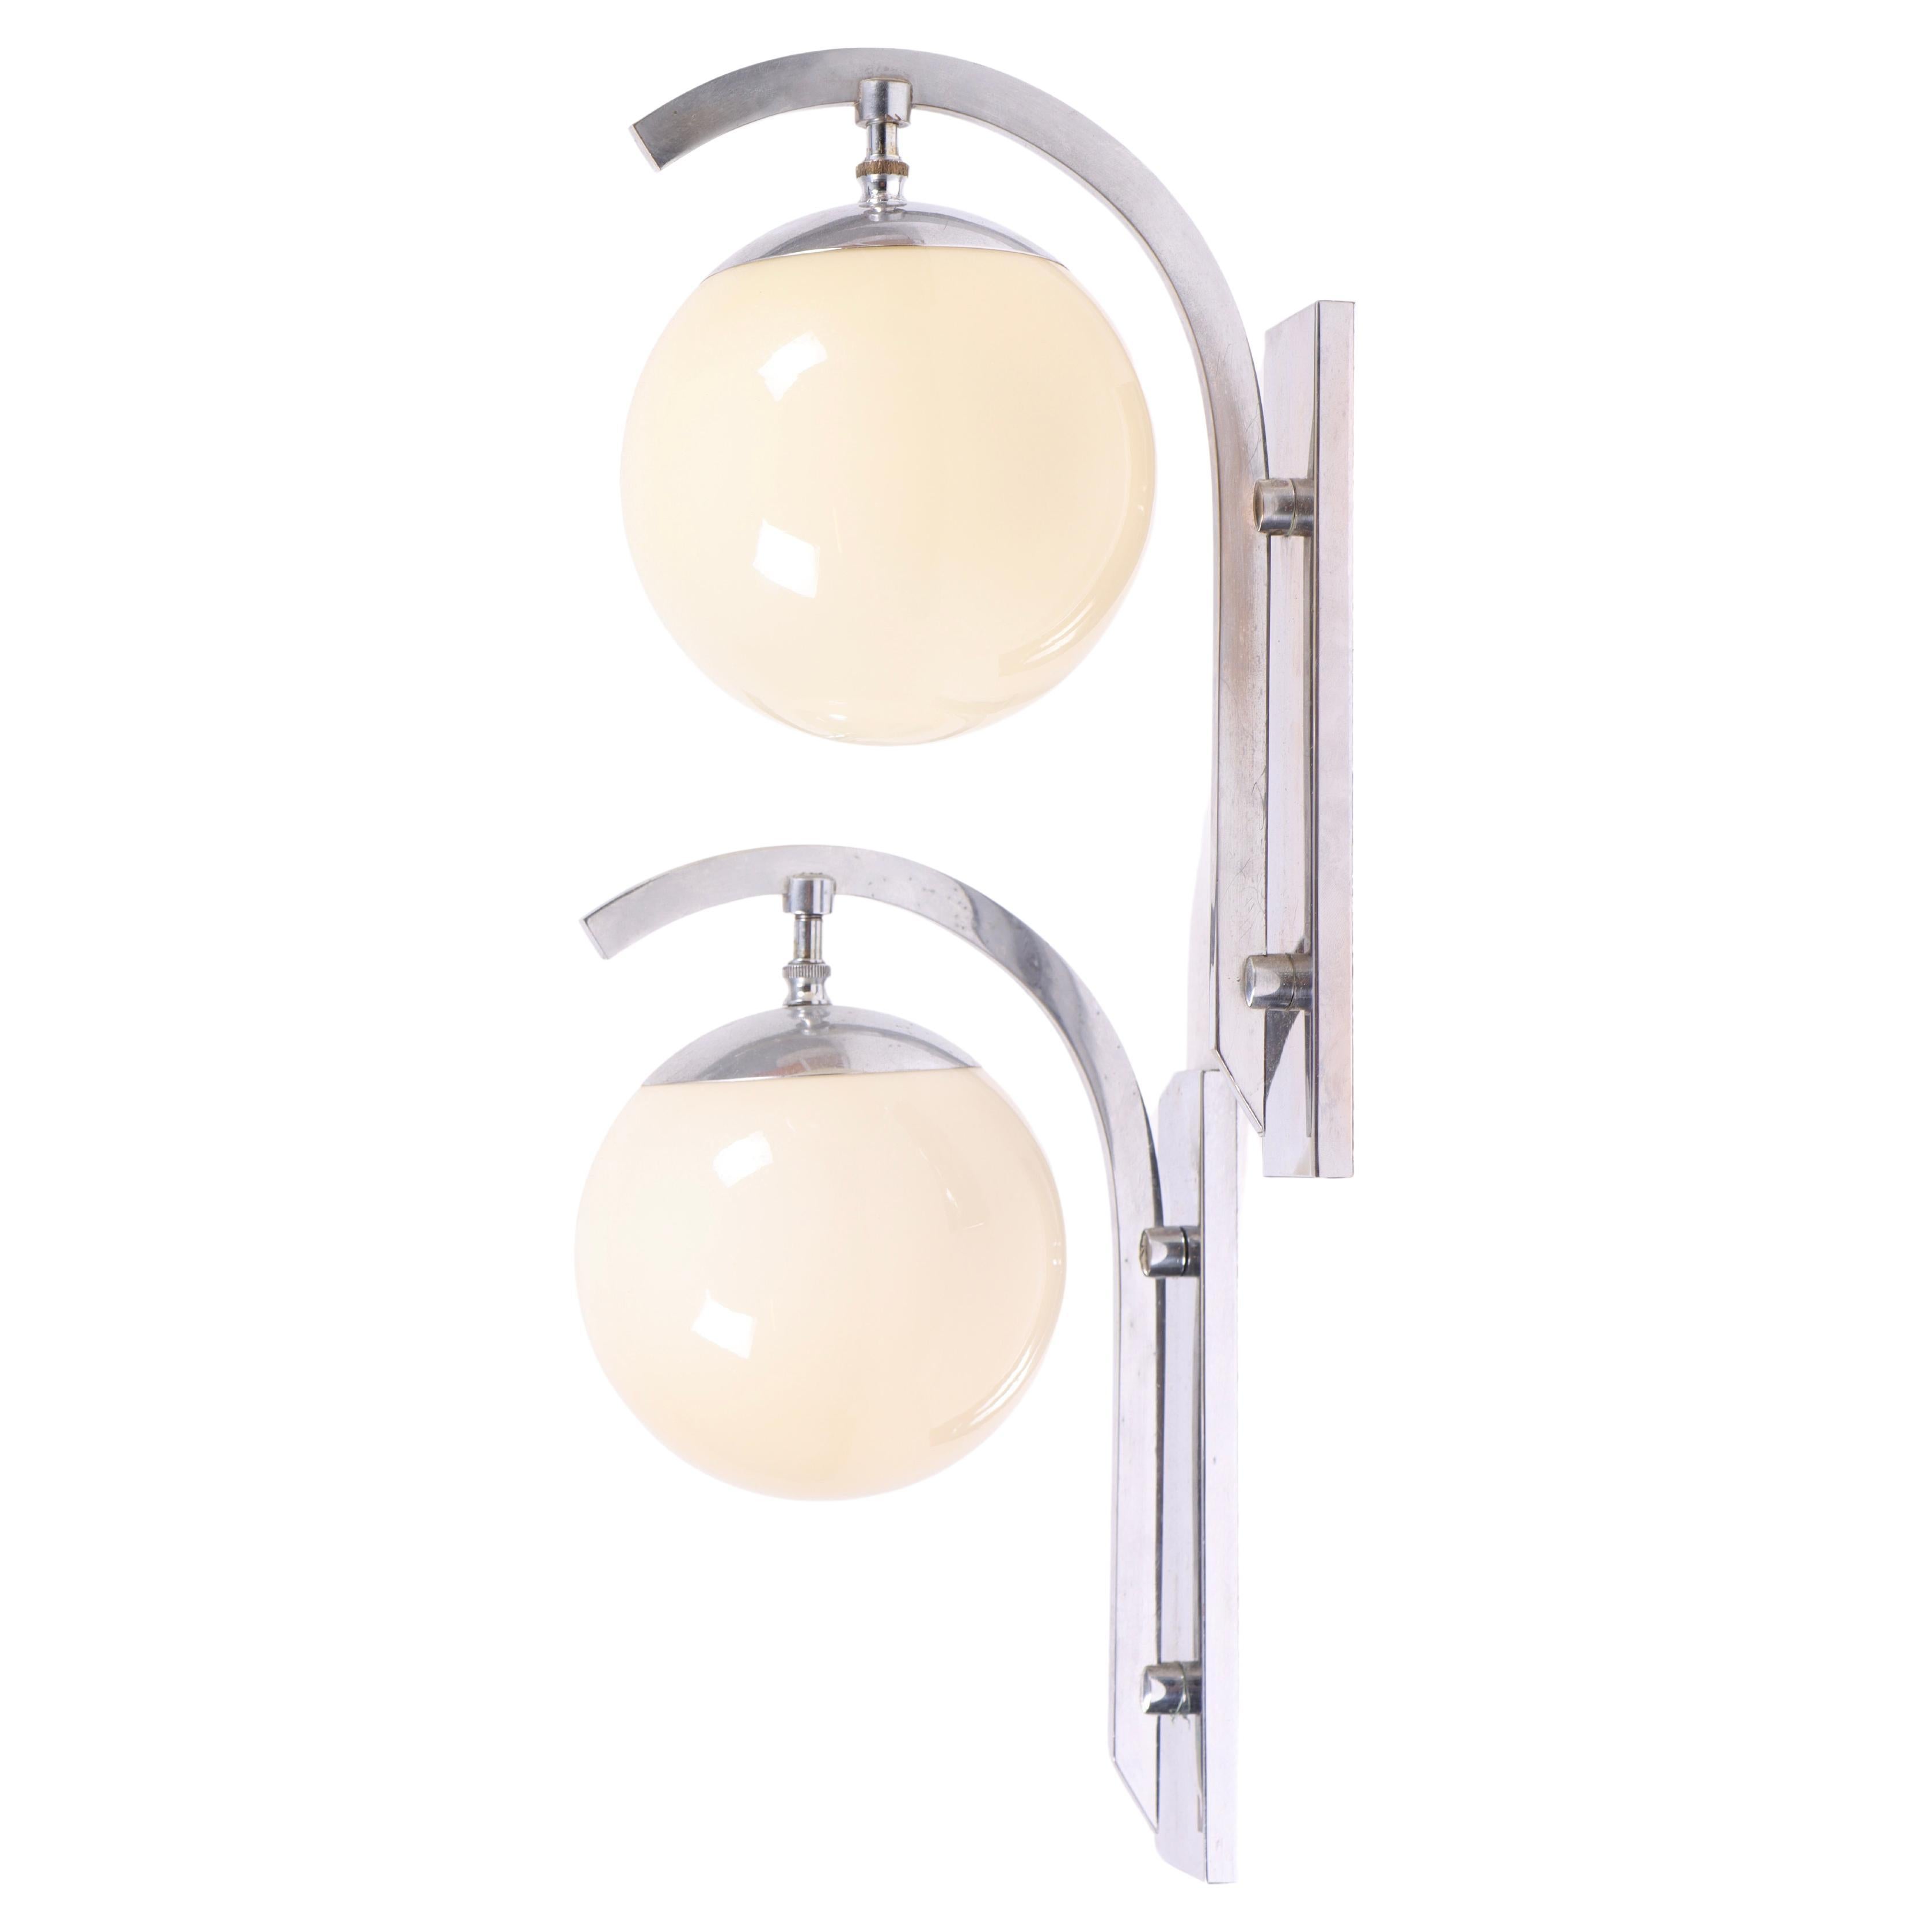 Pair of Art Deco Wall Lamps, Made in Denmark, 1930s